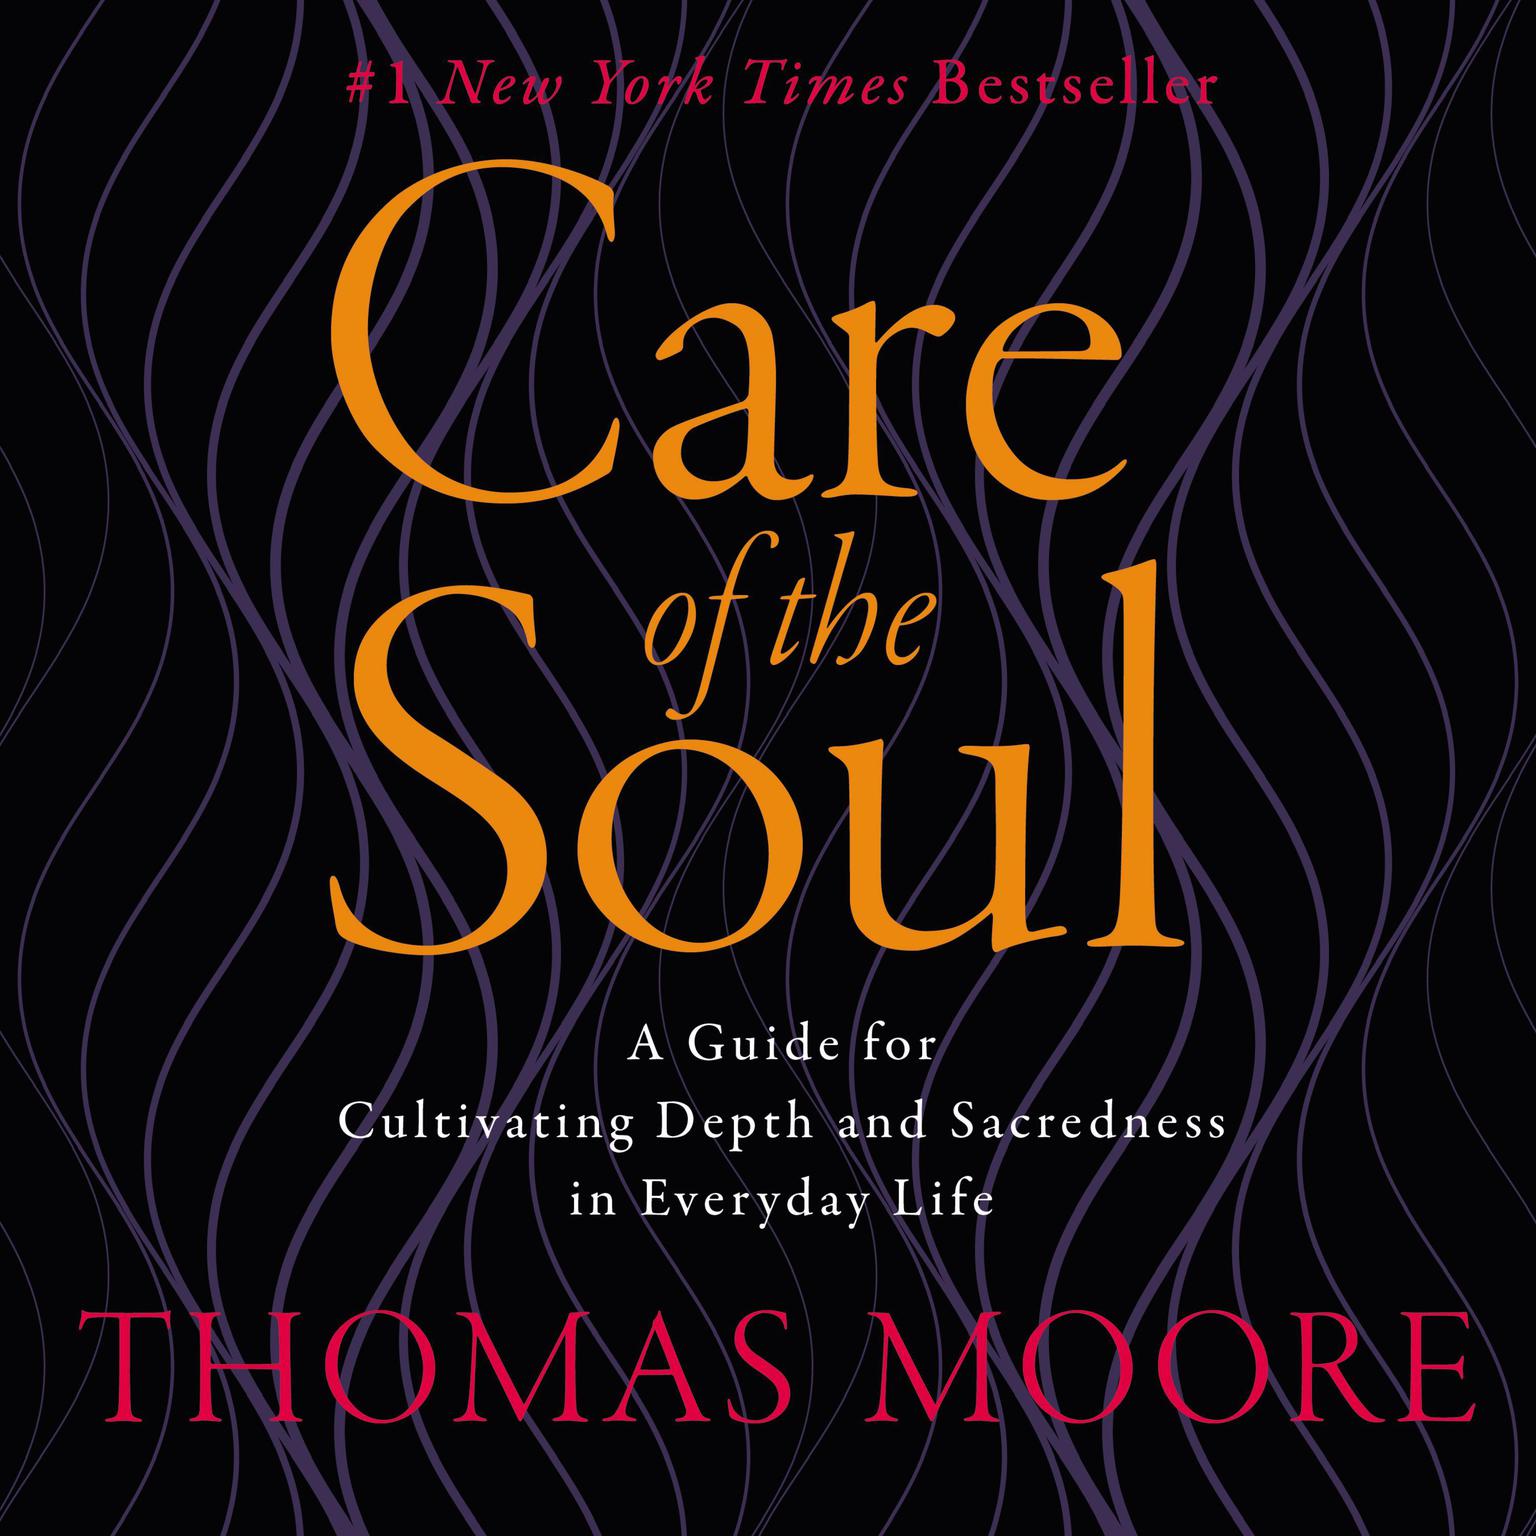 Care of the Soul (Abridged): A Guide for Cultivating Depth and Sacredness in Everyday Life Audiobook, by Thomas Moore